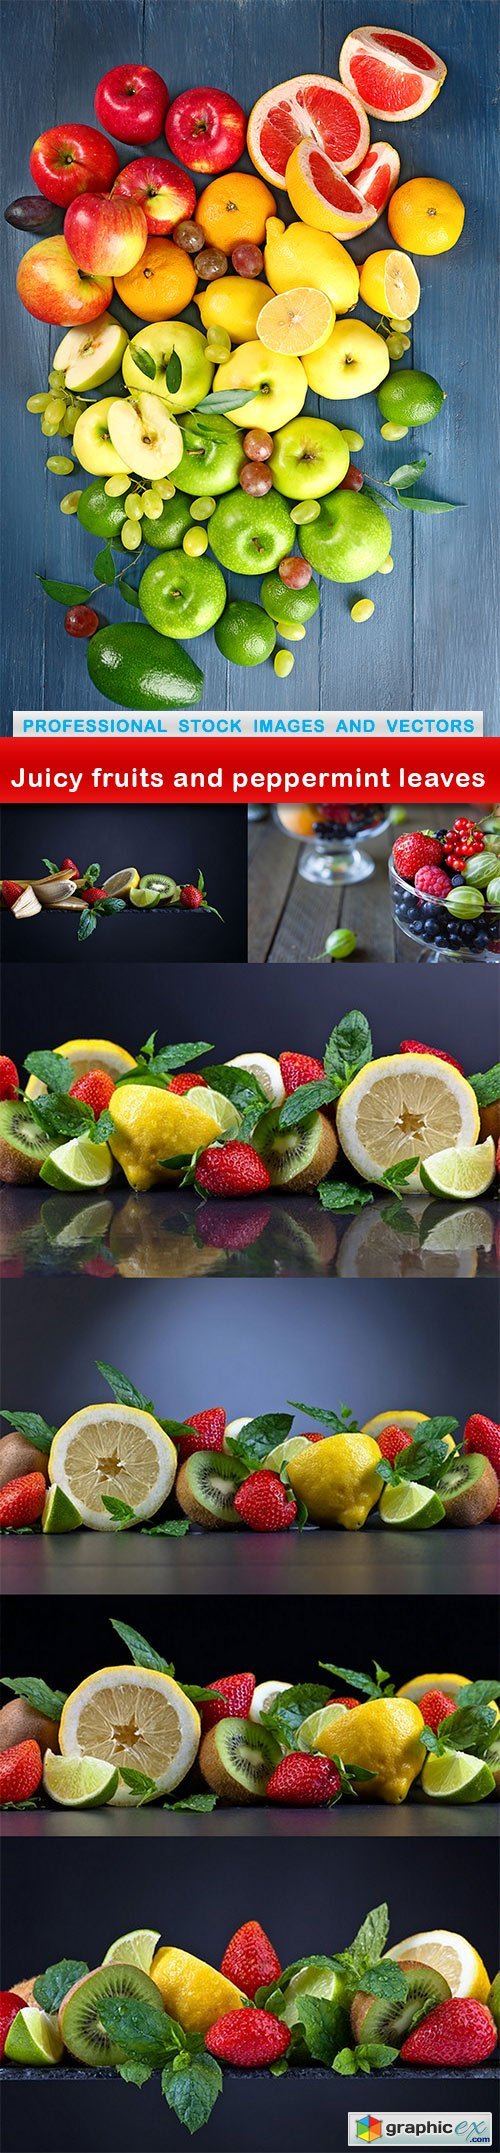 Juicy fruits and peppermint leaves - 7 UHQ JPEG